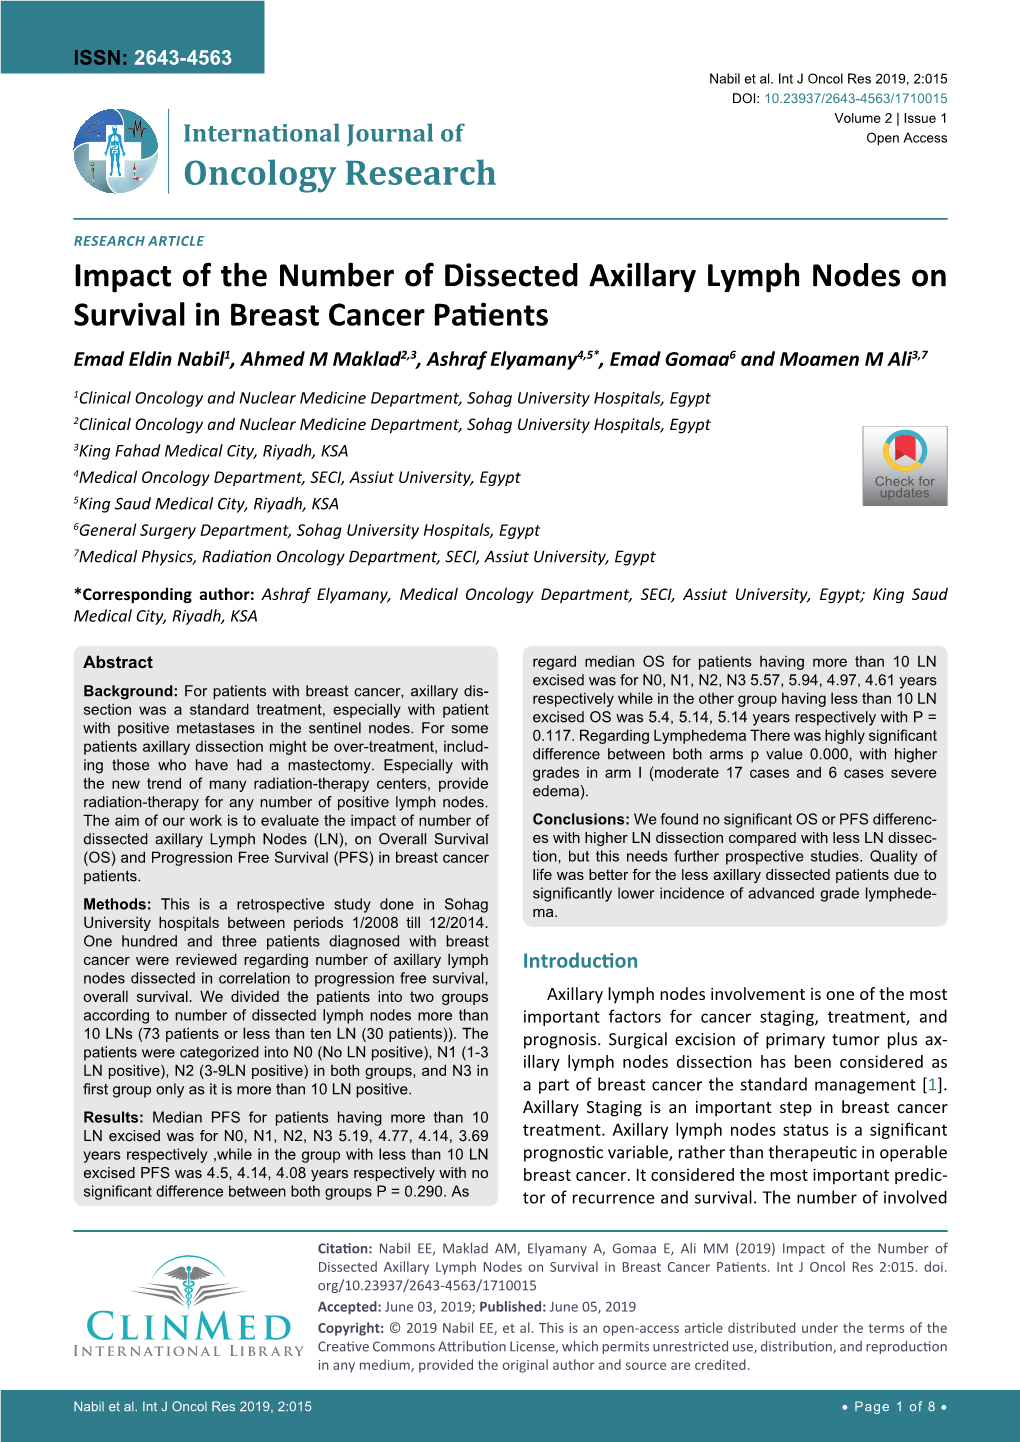 Impact of the Number of Dissected Axillary Lymph Nodes on Survival